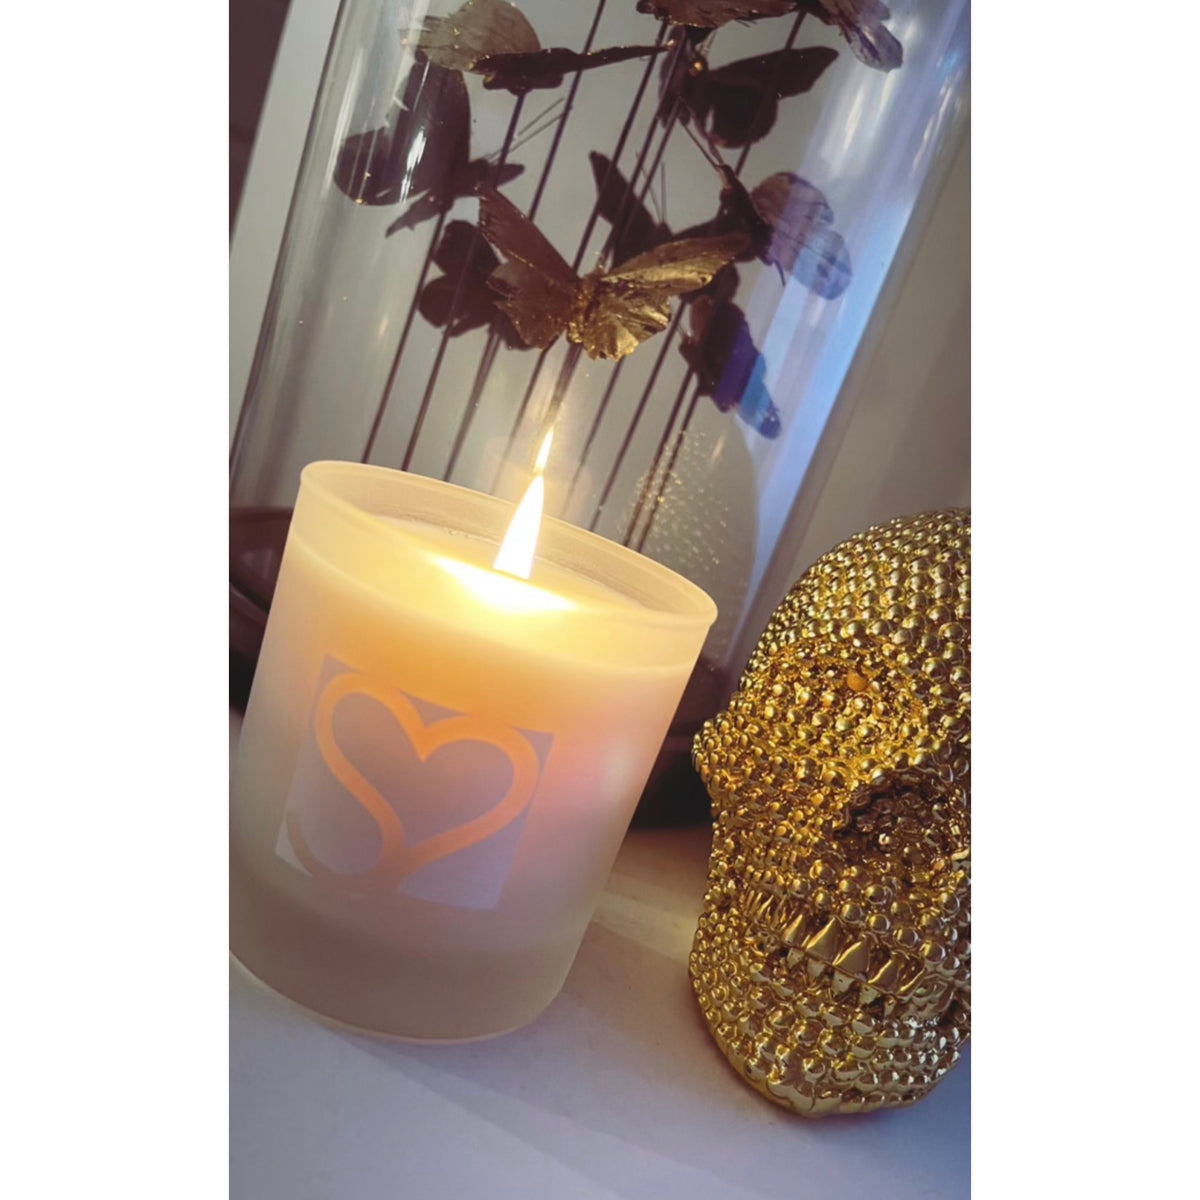 Suite201 Candle